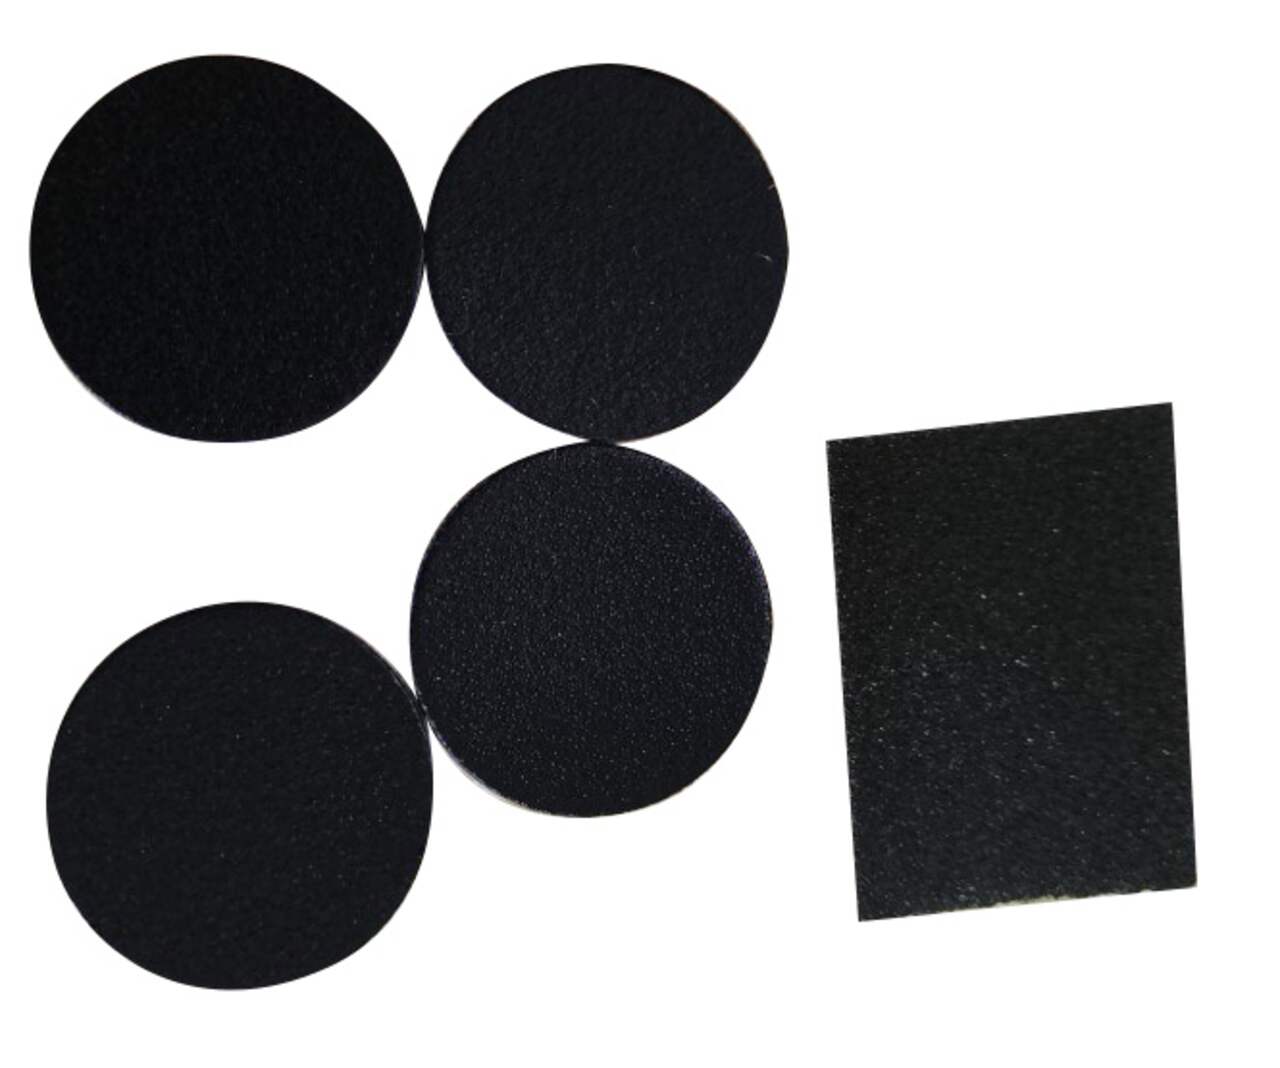 https://media-www.canadiantire.ca/product/playing/cycling/bicycle-accessories/0733005/supercycle-rubber-patch-repair-kit-for-bikes-a3a0f60e-643c-45d3-acf4-f5b16f6f41ce.png?imdensity=1&imwidth=640&impolicy=mZoom